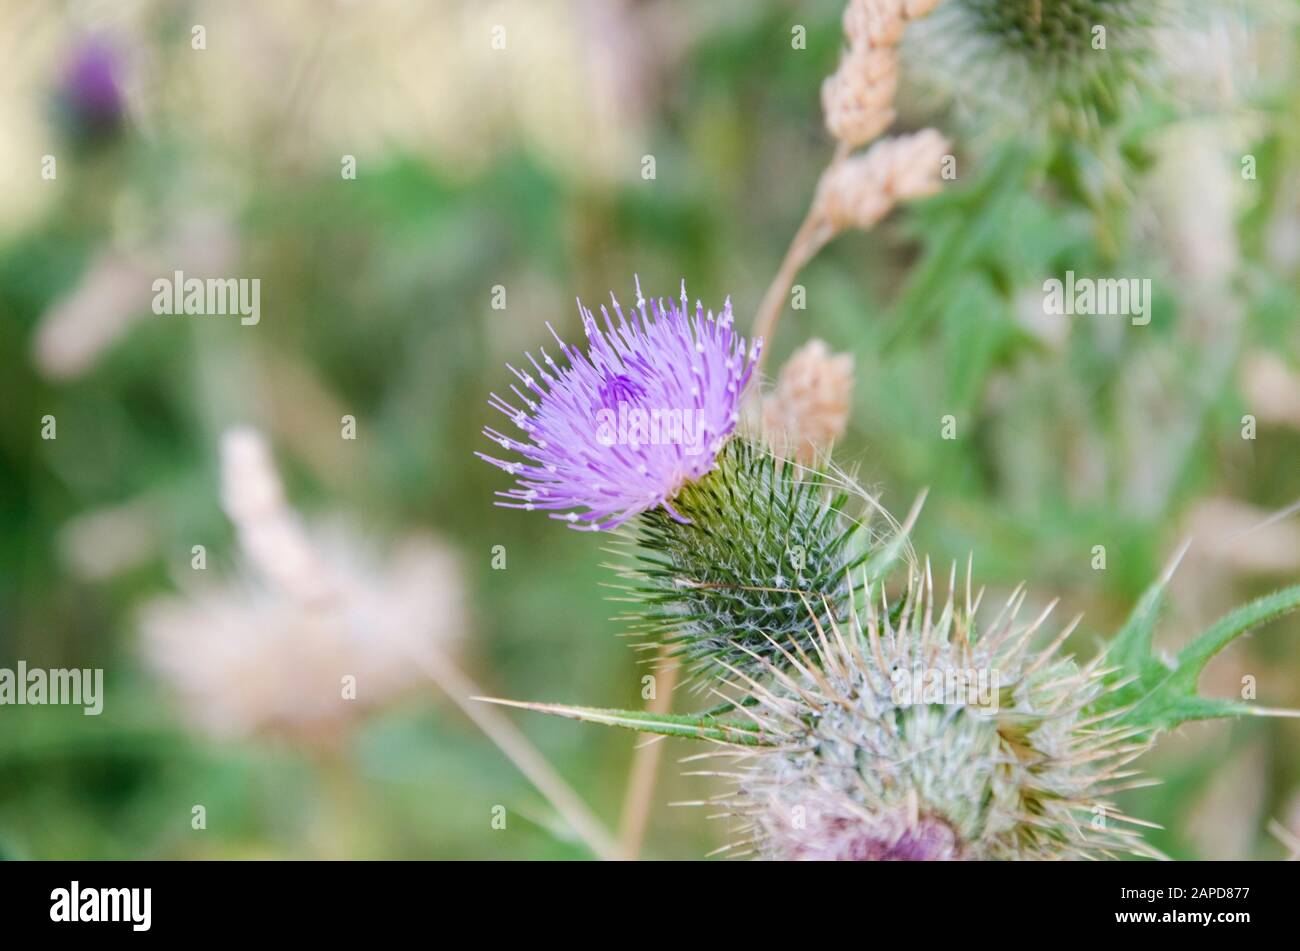 Thistle in bloom, Carduus pycnocephalus, also known as Italian thistle, Italian plumeless thistle and Plymouth thistle, in the Bosque Energético, Ener Stock Photo